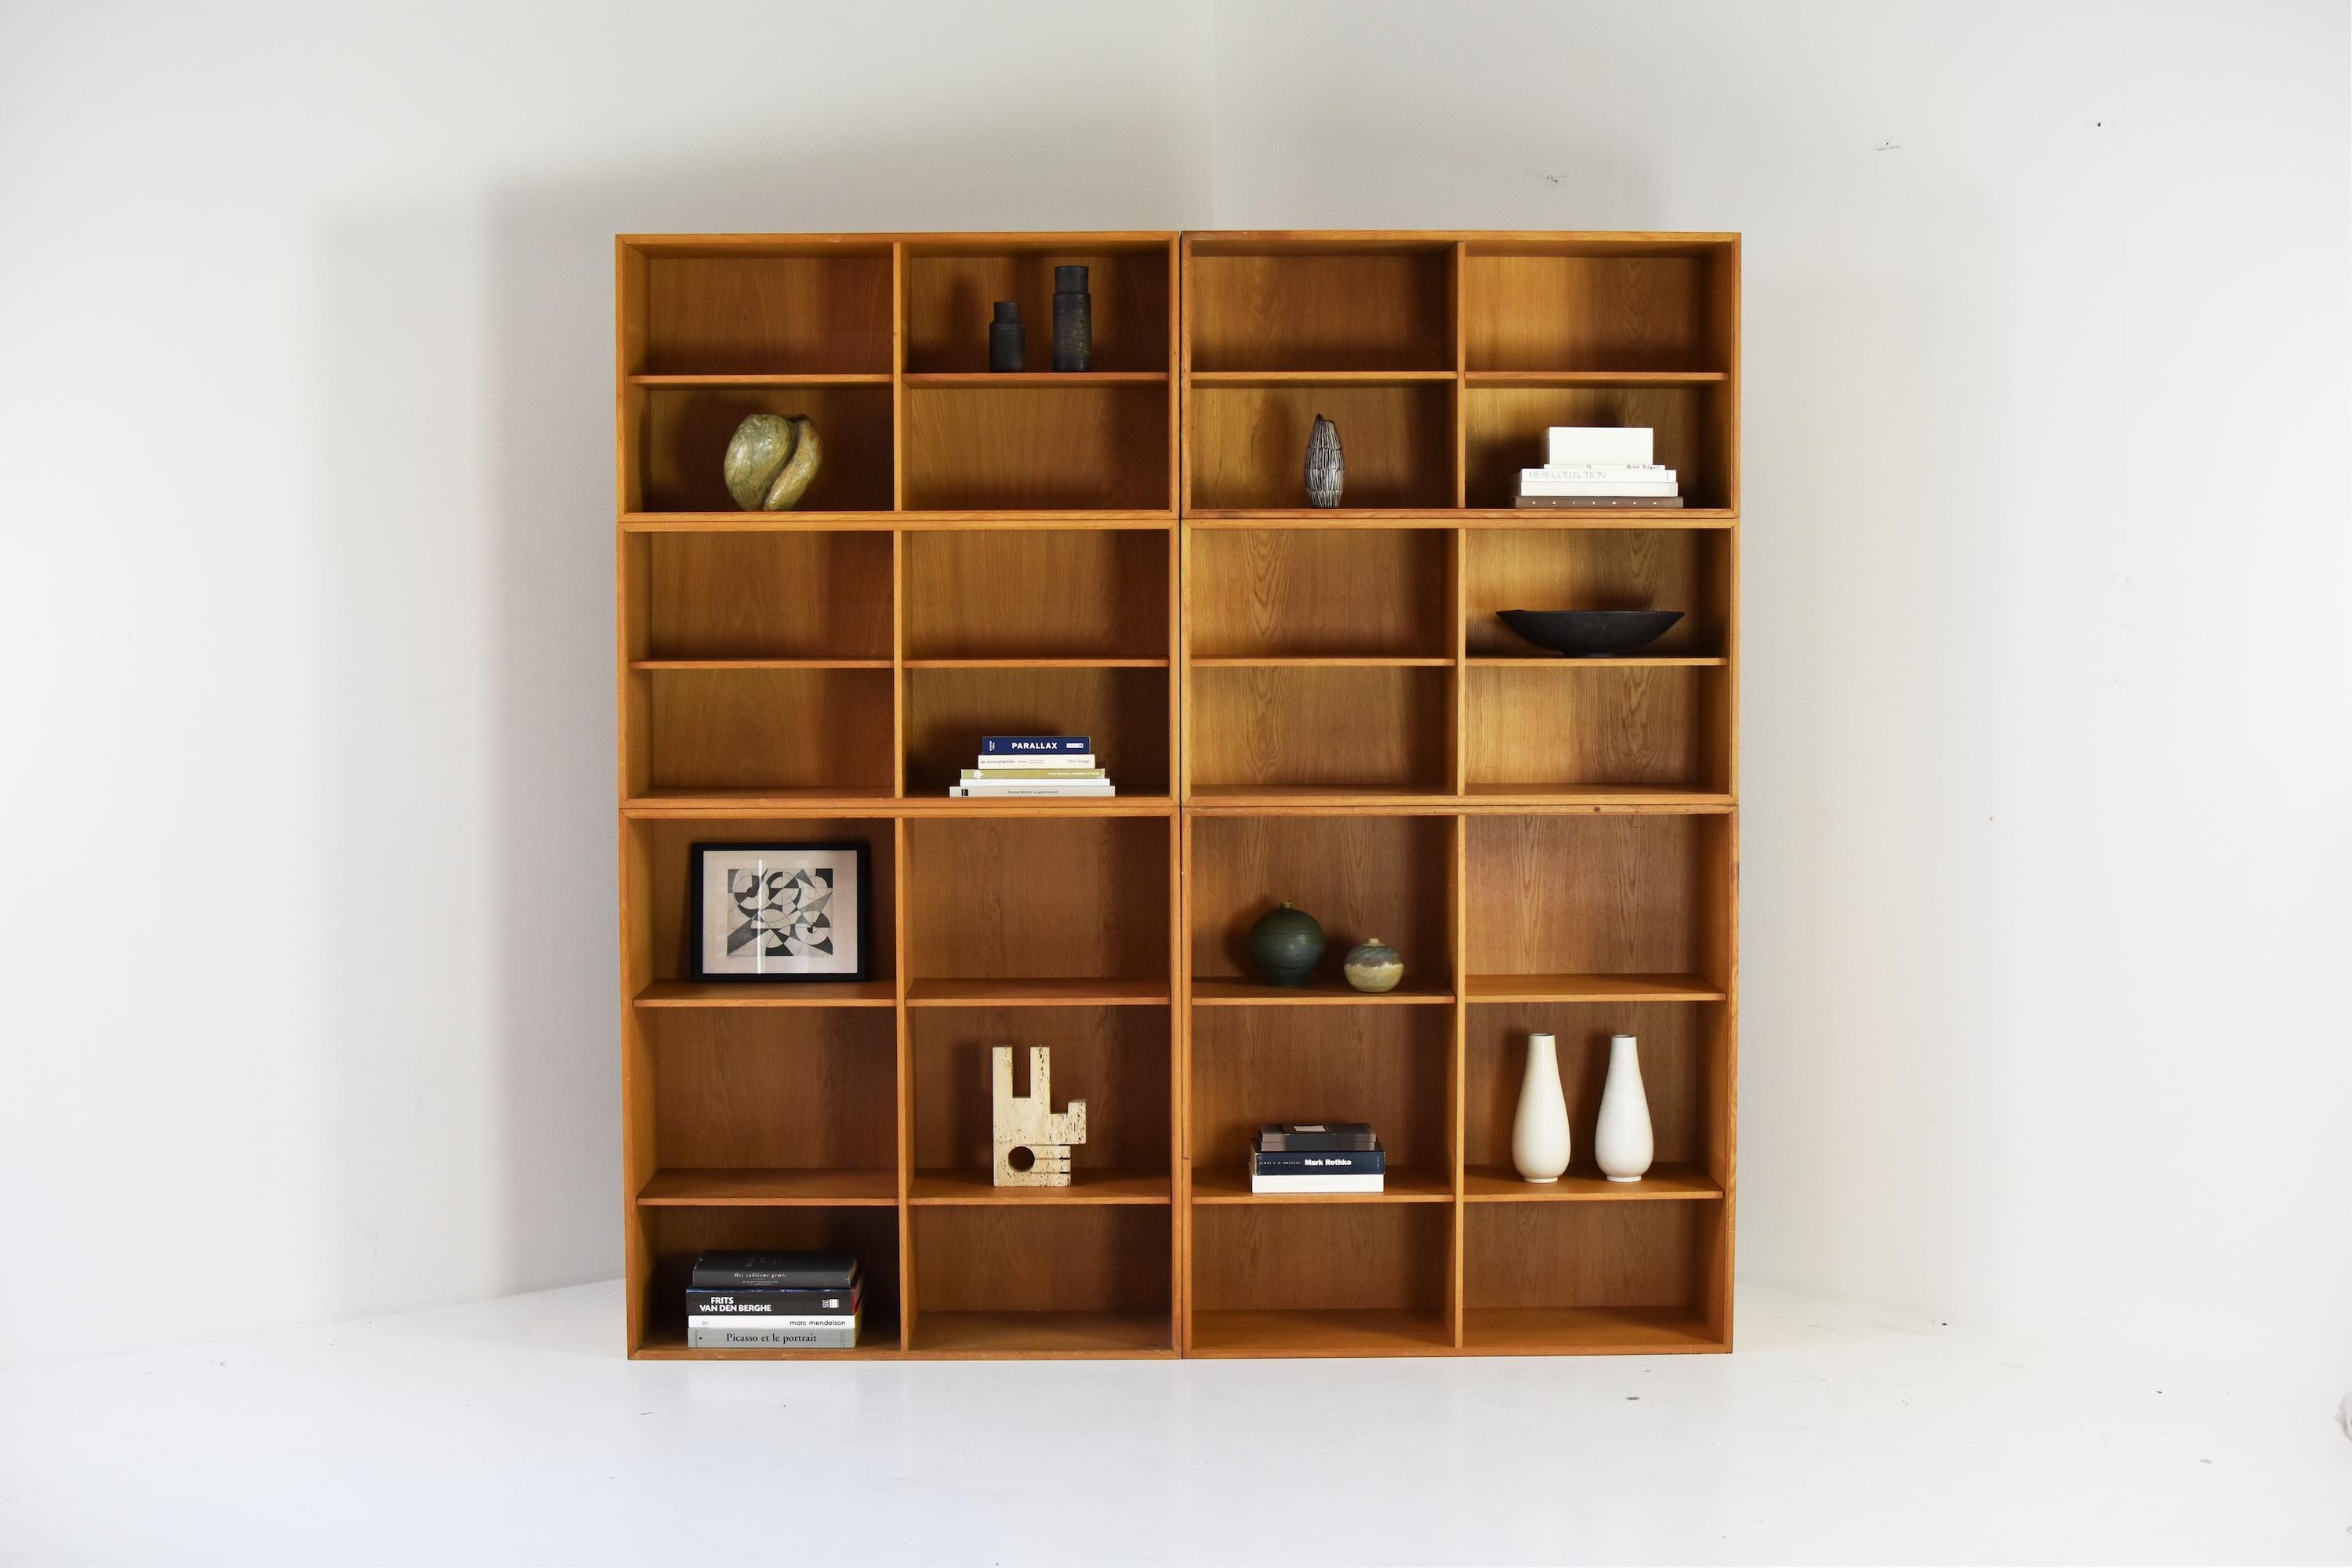 Open storage cabinets by Rud Thygesen for HG Furniture, Denmark 1960s. This unit consist of 6 cabinets in oak with adjustable shelves. Multiple set-ups are possible. Labeled on the back. Good original condition with some visible wear from age and